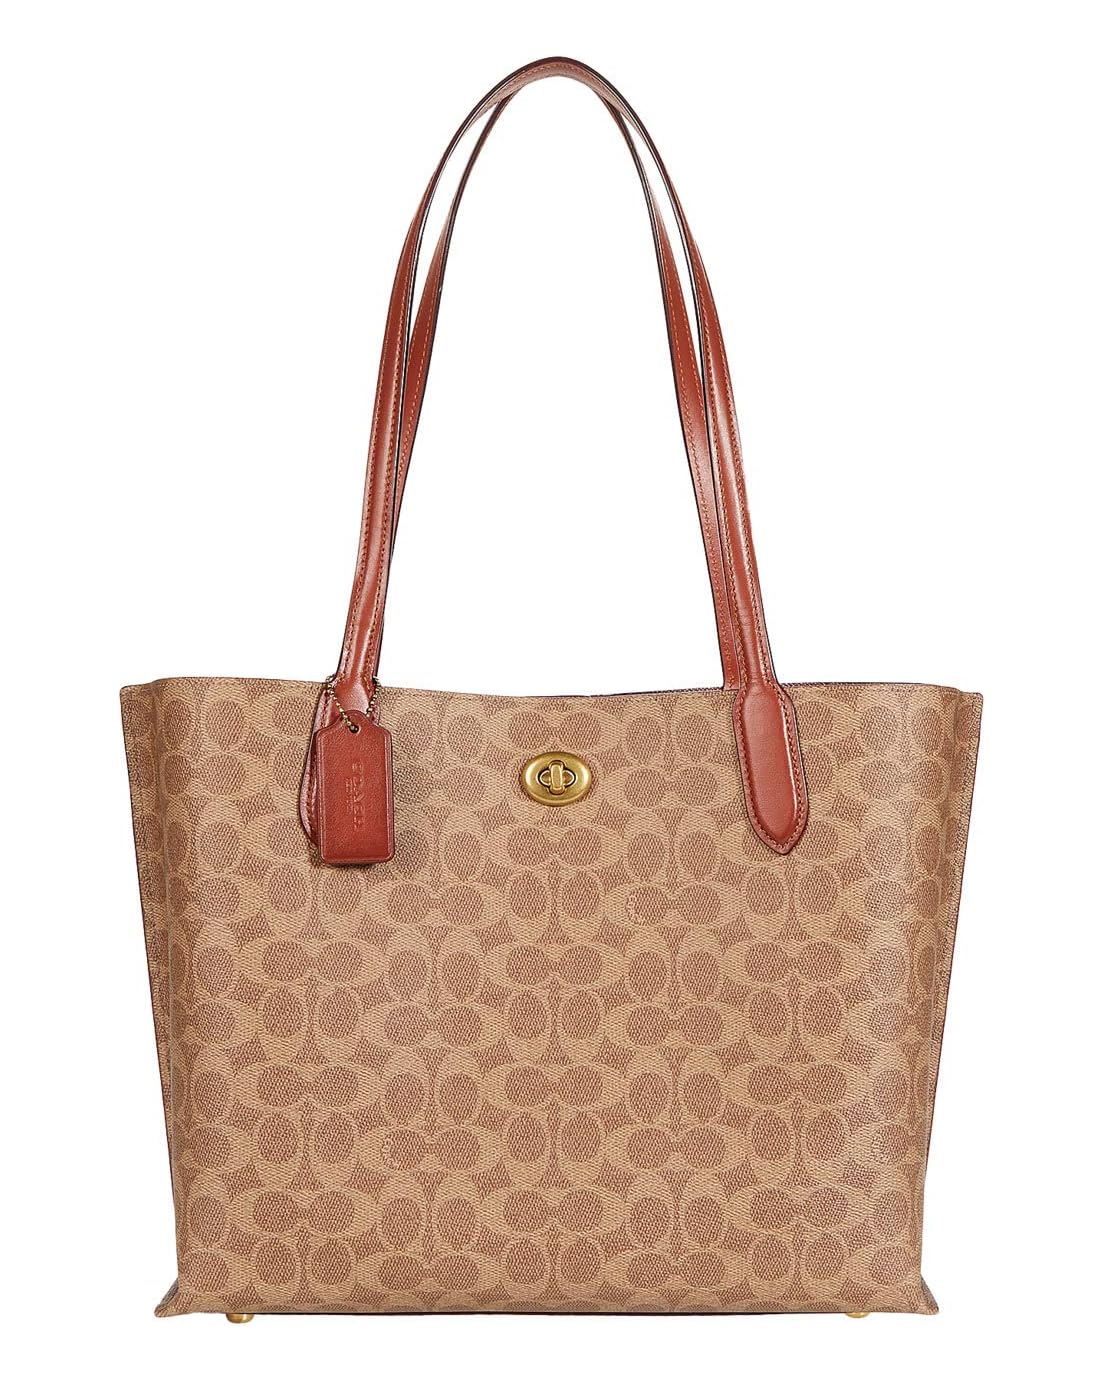 COACH Coated Canvas Signature Willow Tote